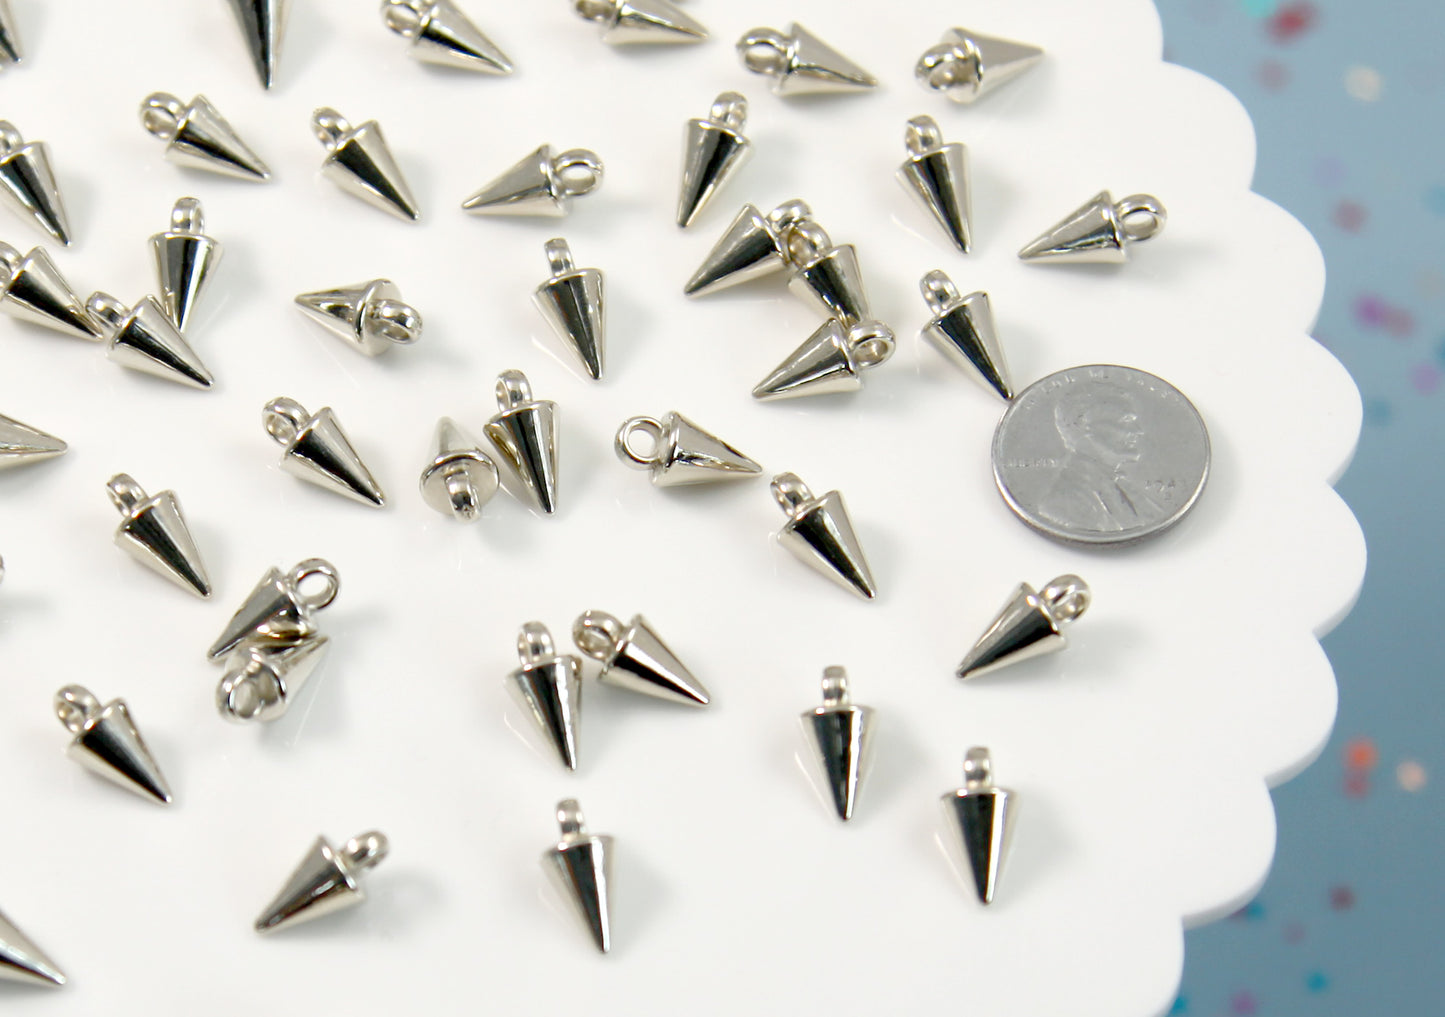 Small Spike Charms - 50 pc set - 15mm Small Spiky Charm - Electroplated Silver - With Holes to Easily make Jewelry